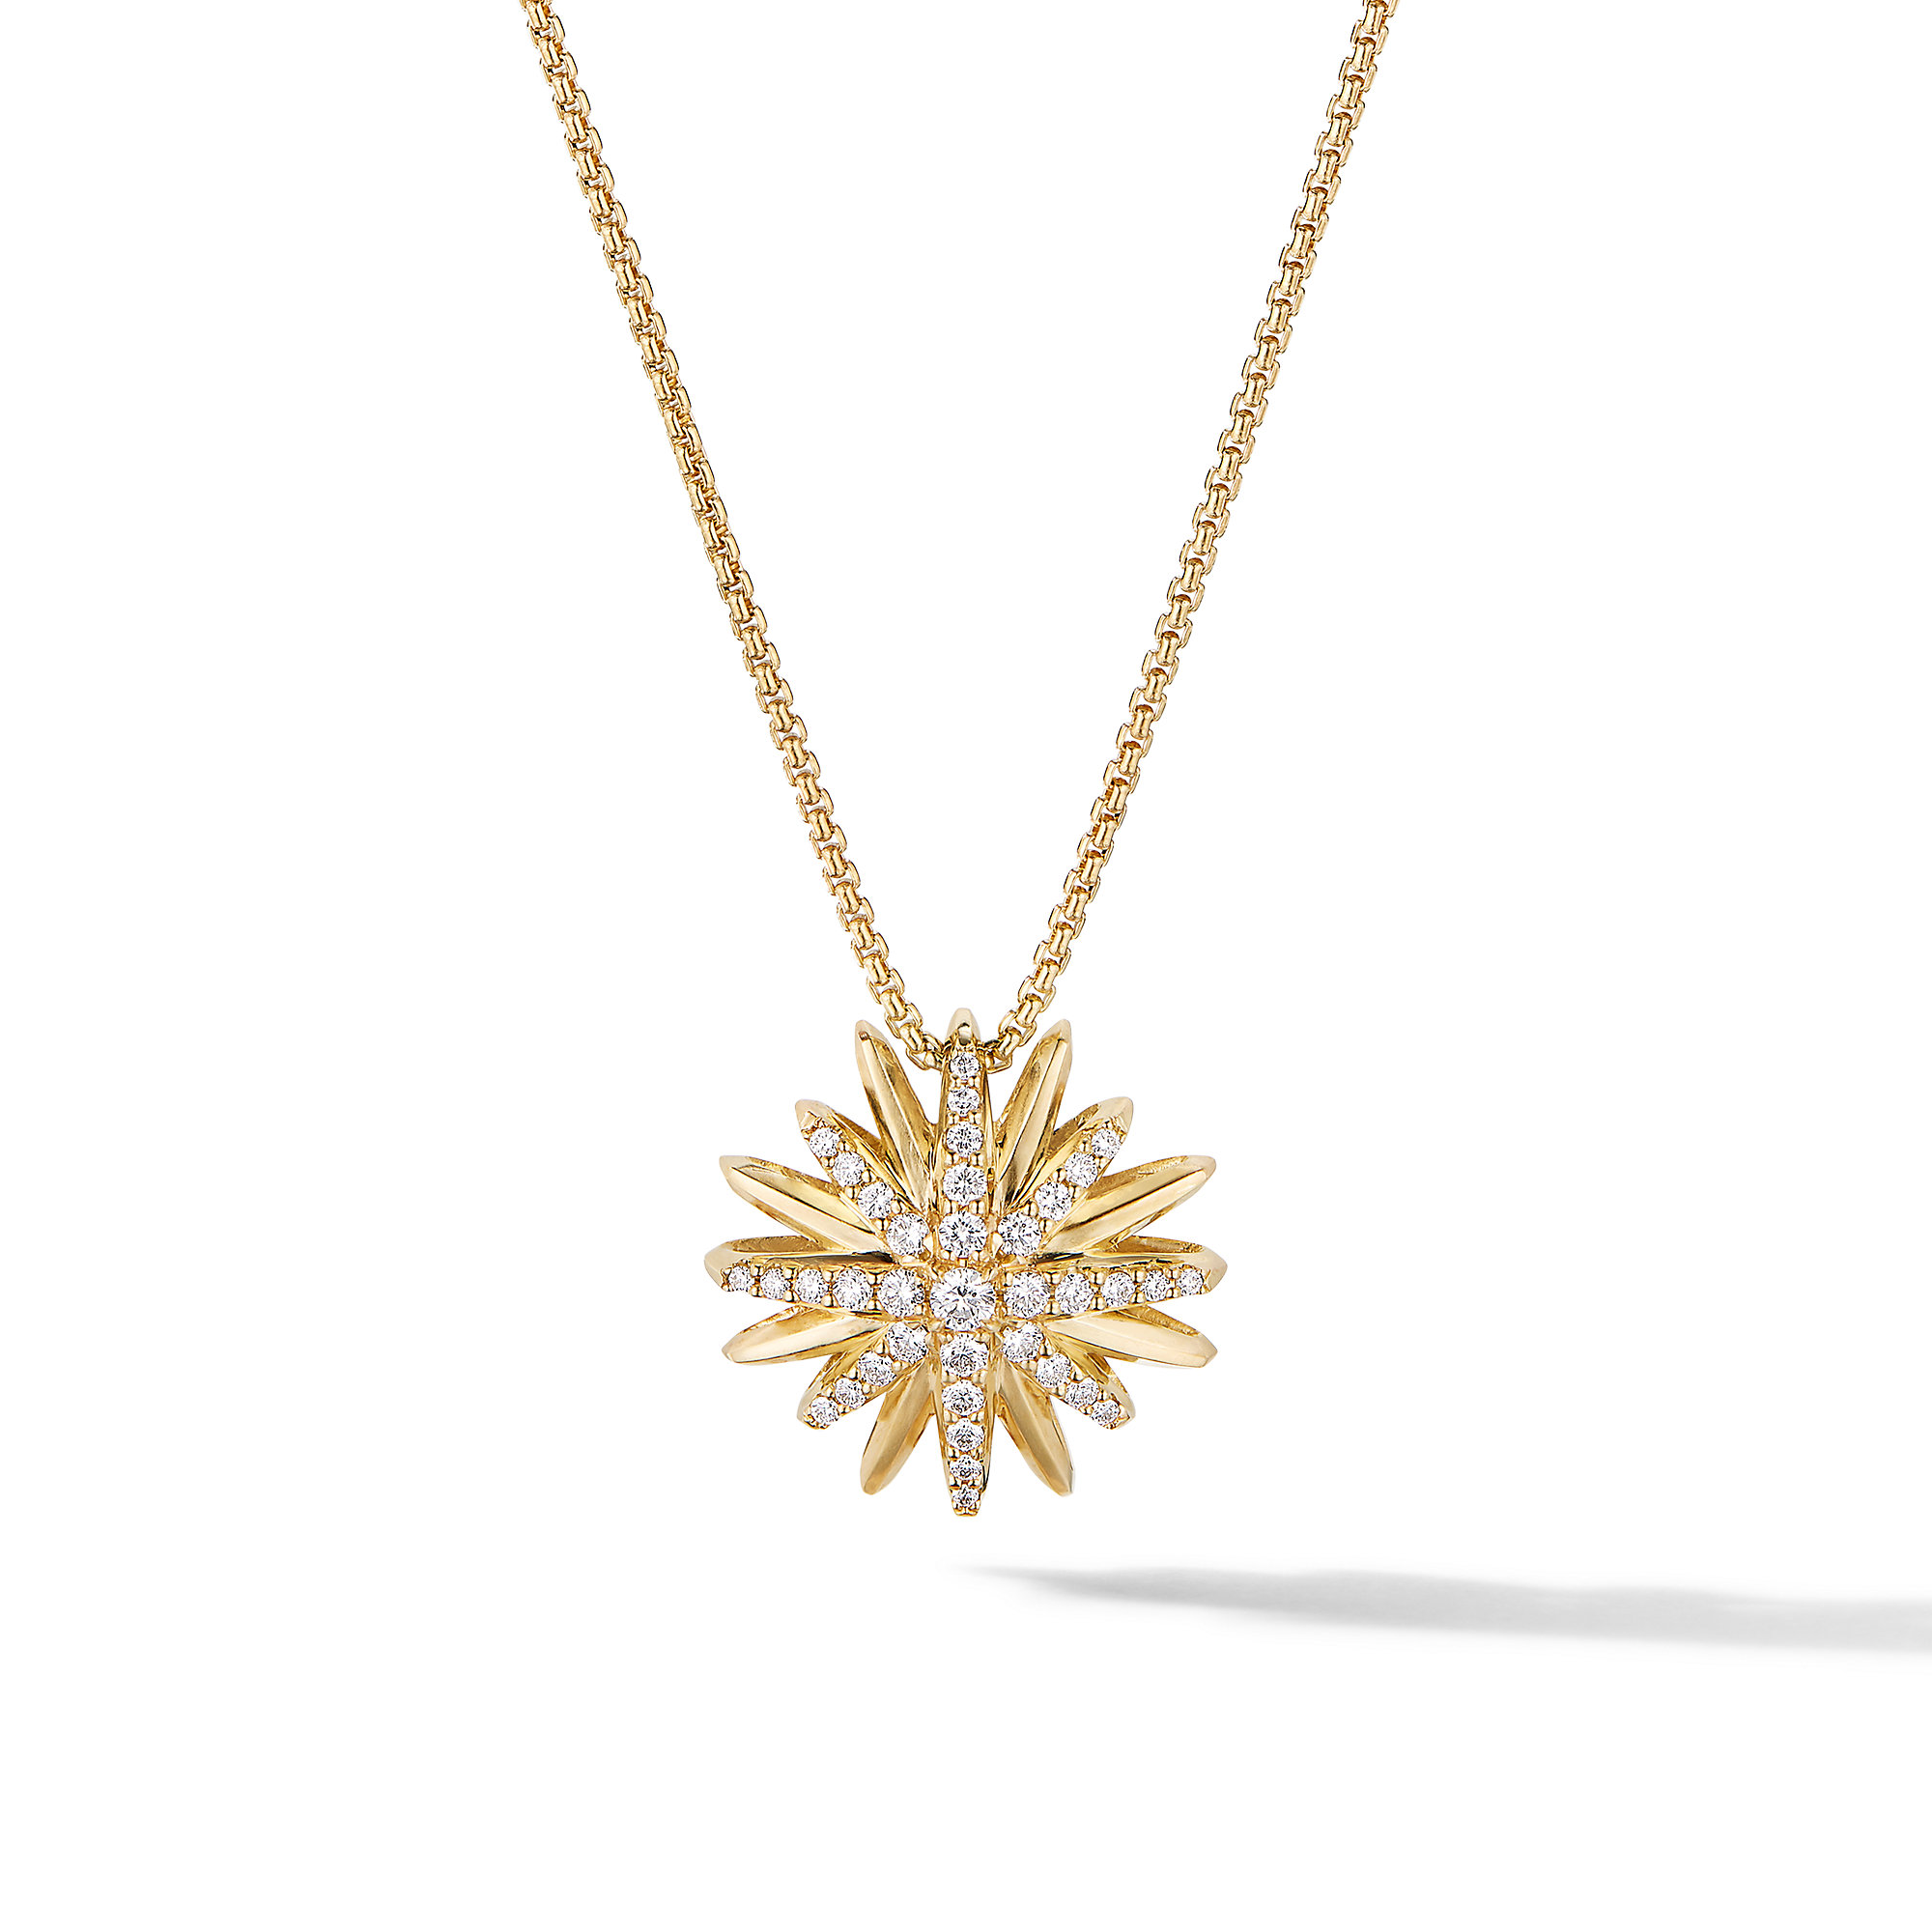 Starburst Pendant Necklace in 18K Yellow Gold with Diamonds - N16432D88ADI